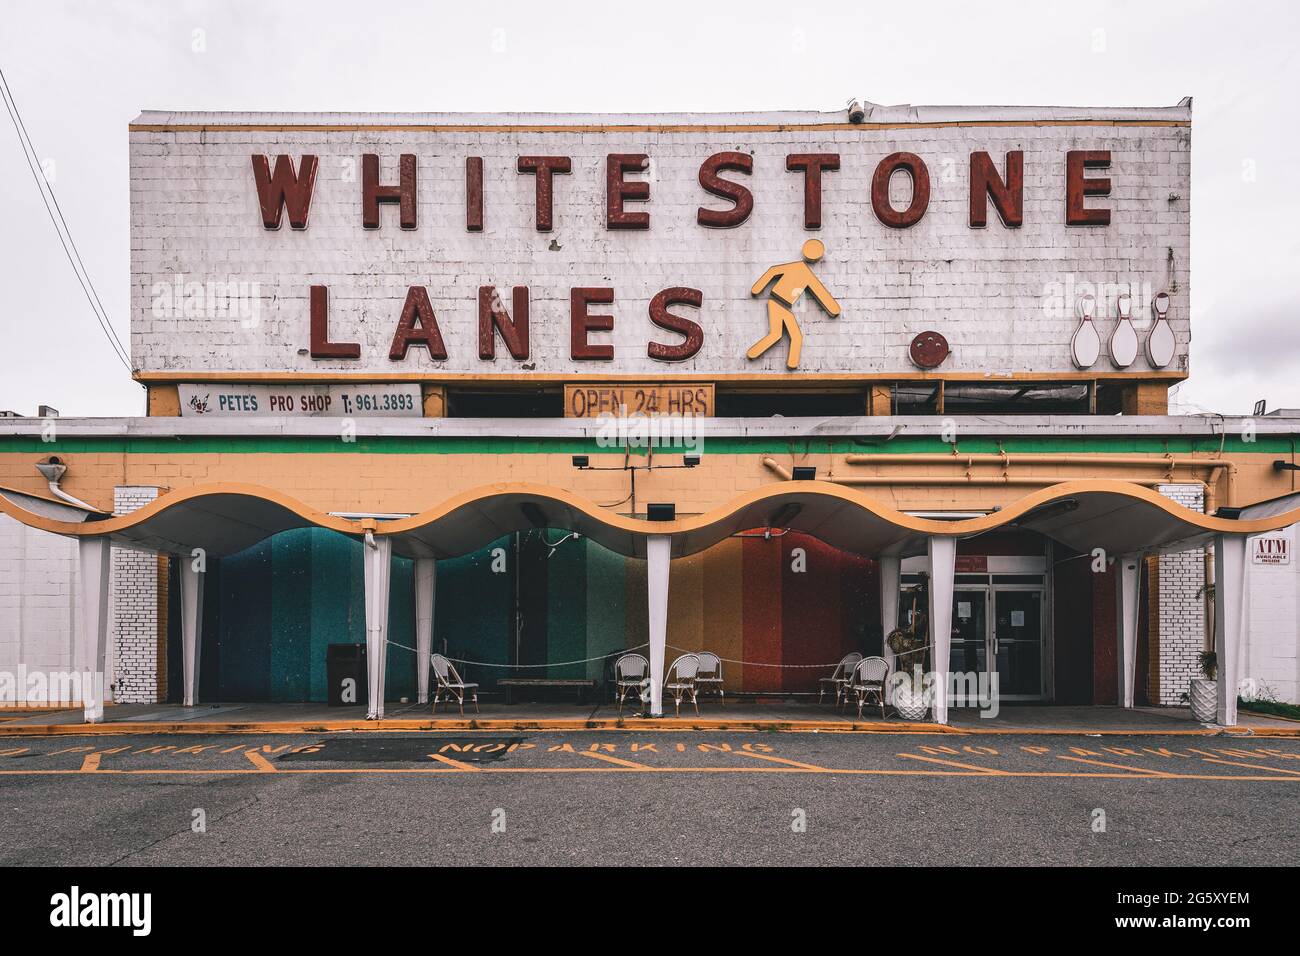 Bowling alley sign in Whitestone, Queens, New York Stock Photo